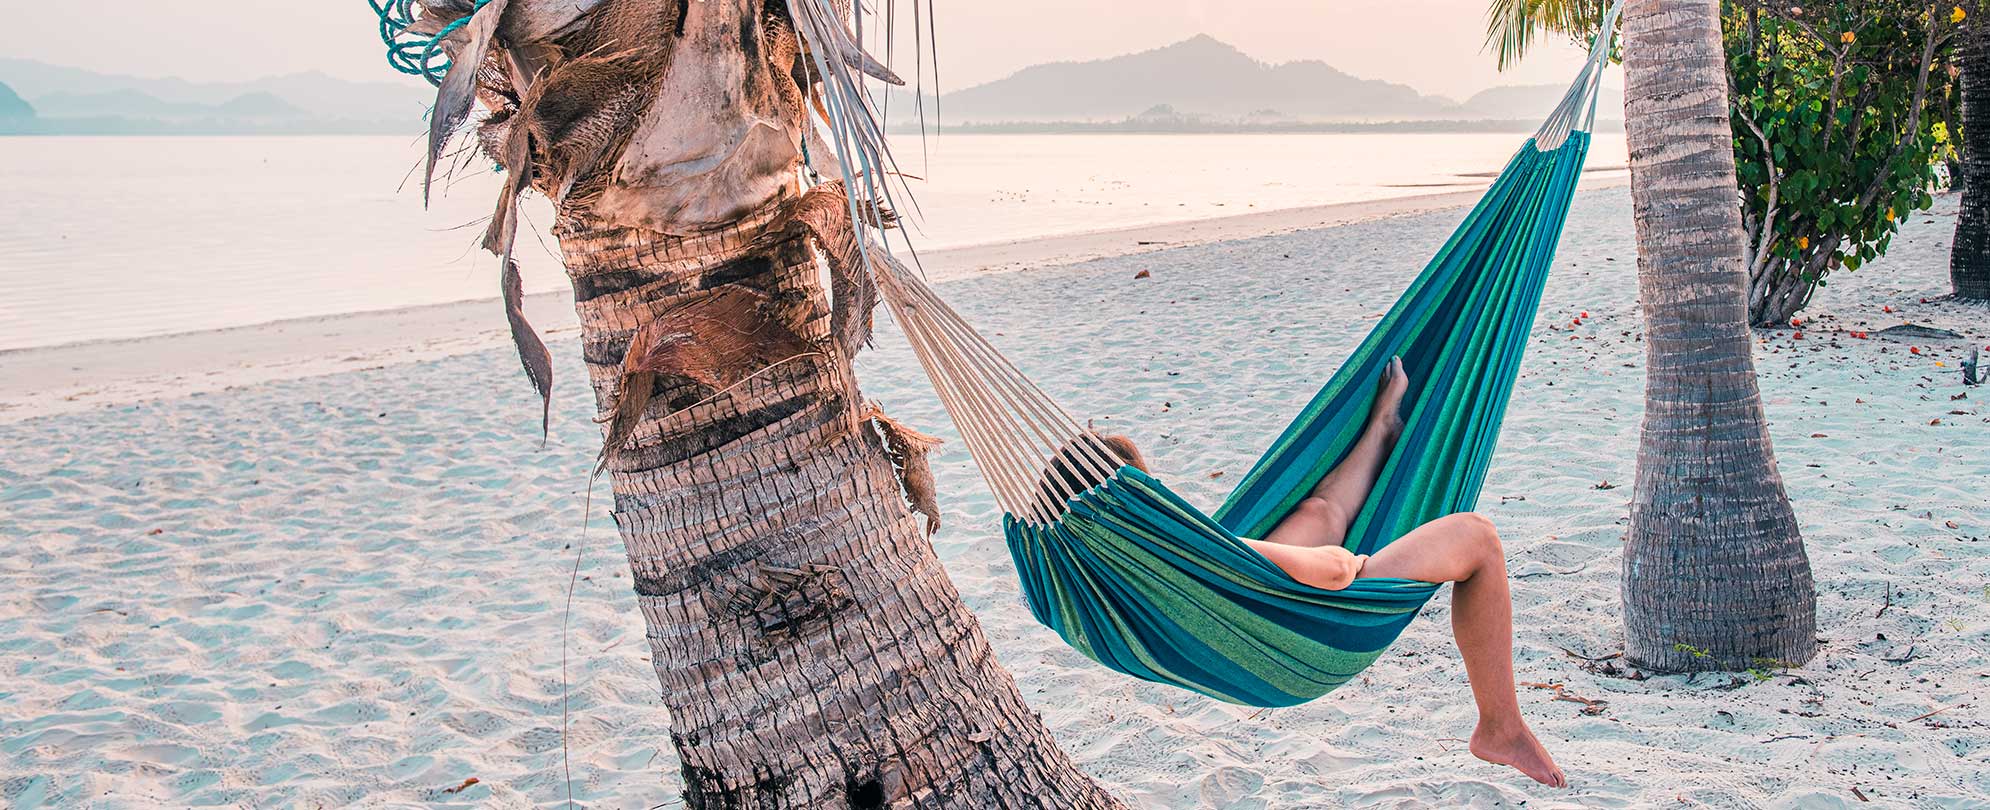 A person lounging in a hammock strung between two palm trees on a sandy beach